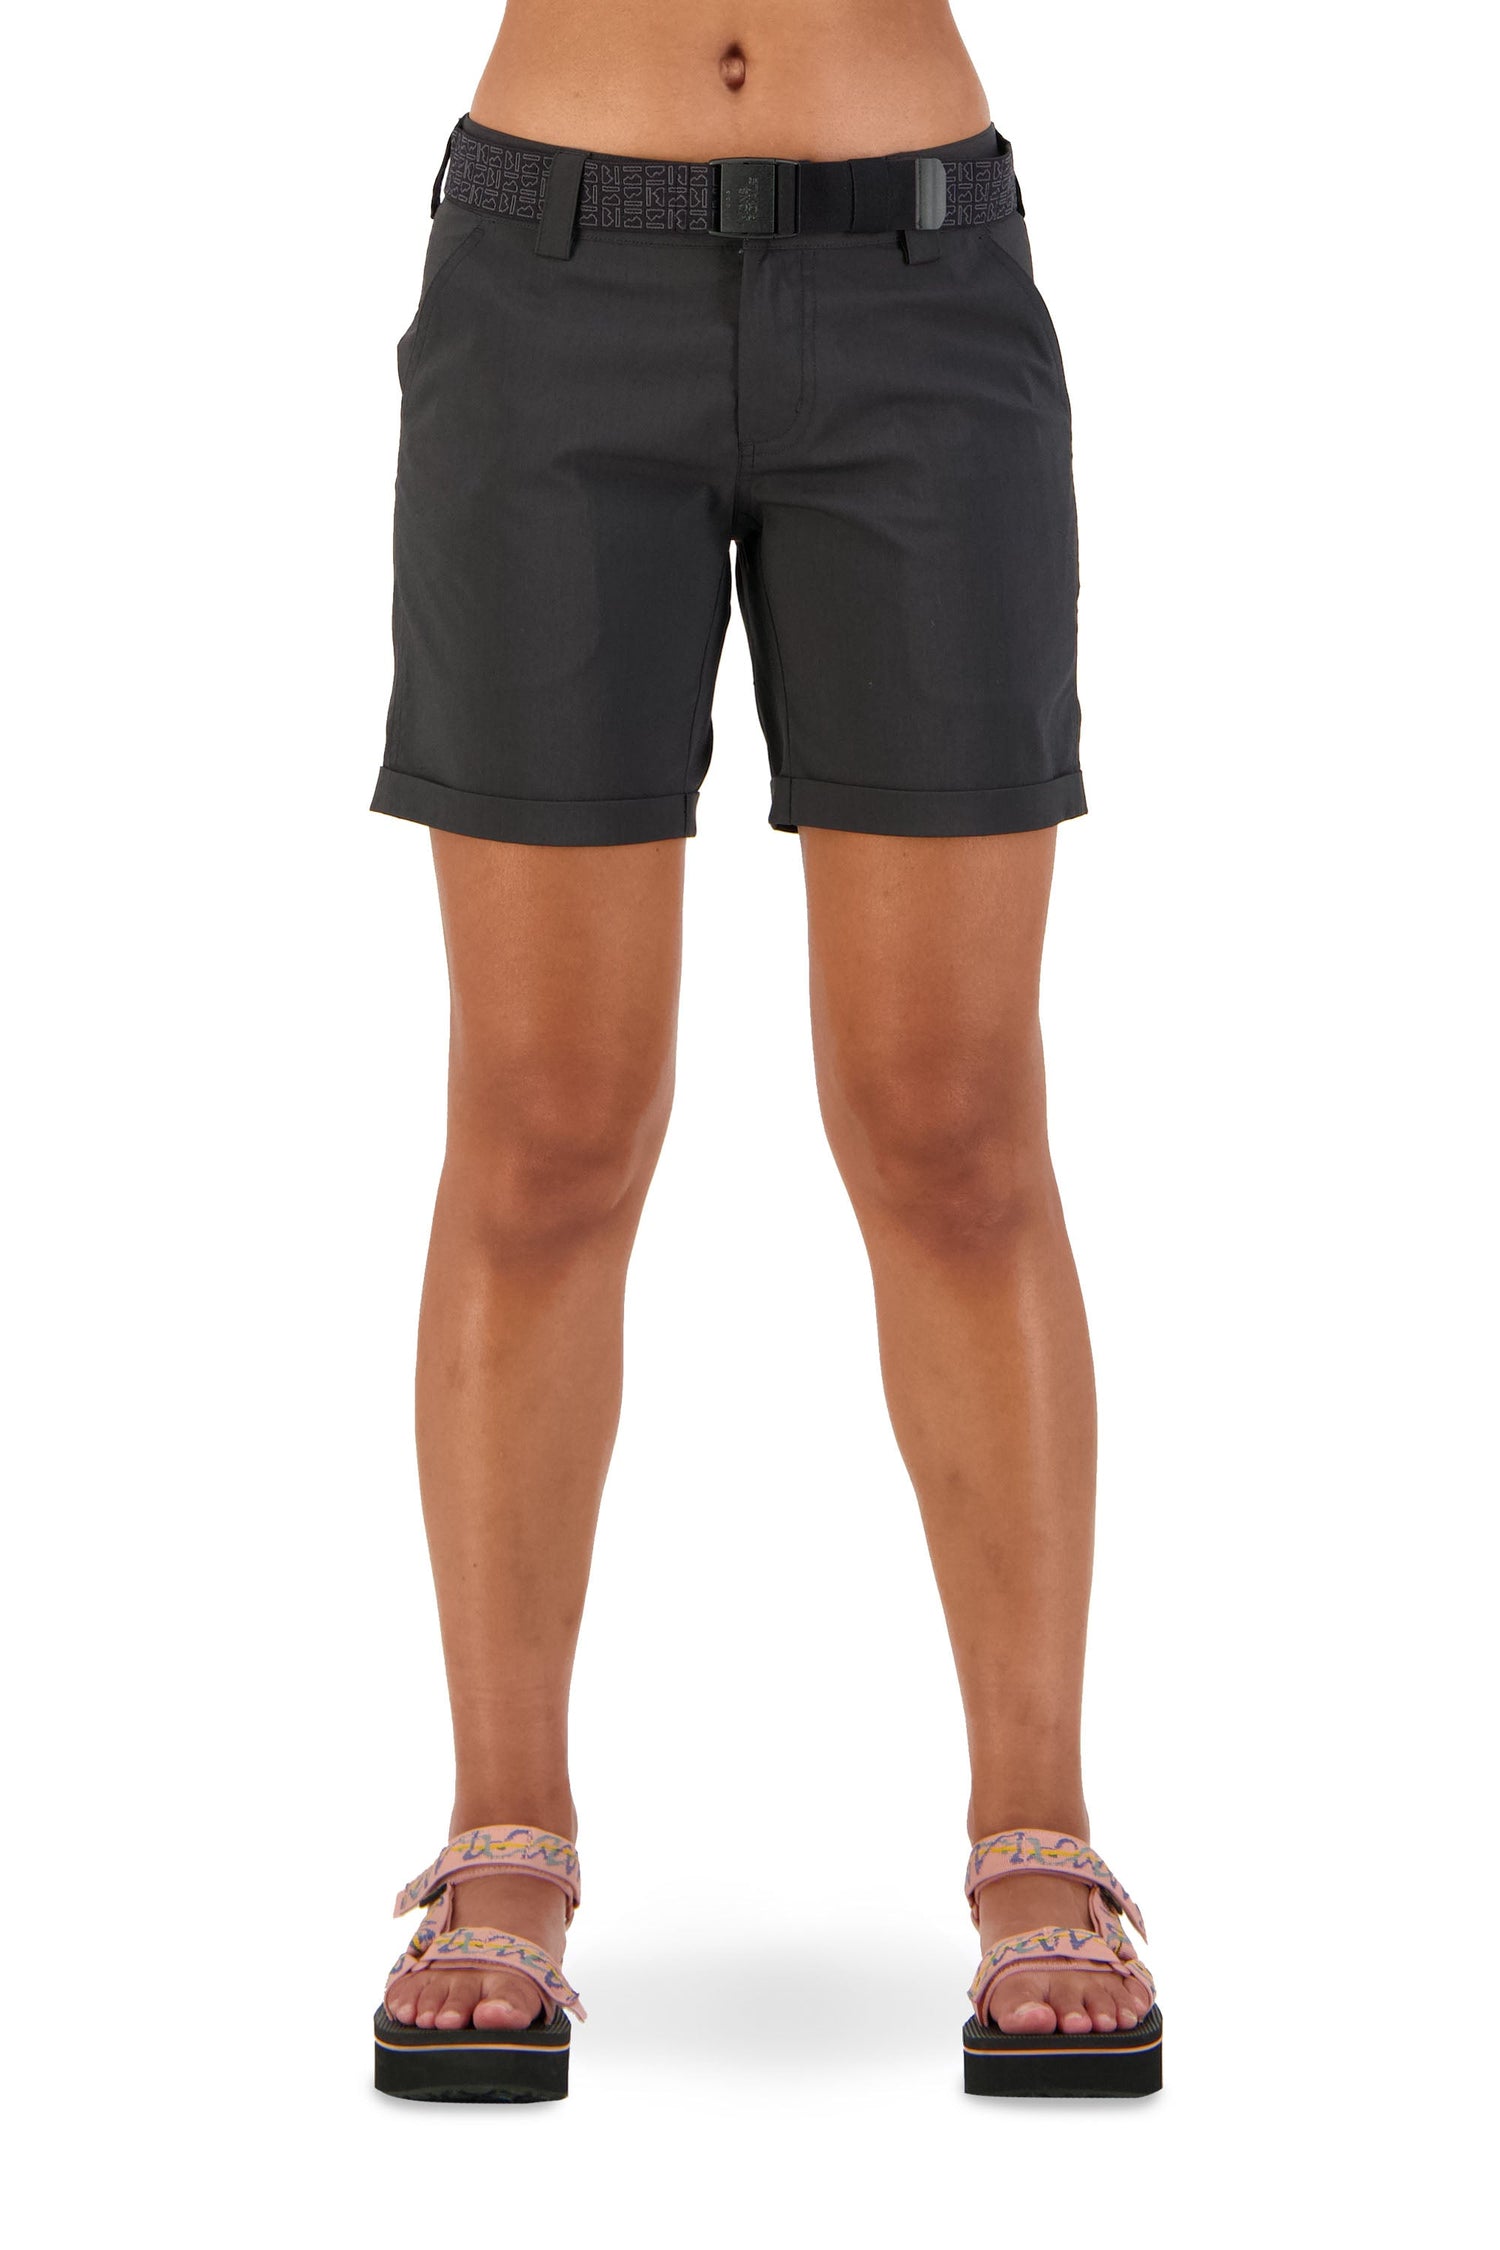 Mons Royale - W's Drift Shorts - Recycled Polyester & Merino - Weekendbee - sustainable sportswear